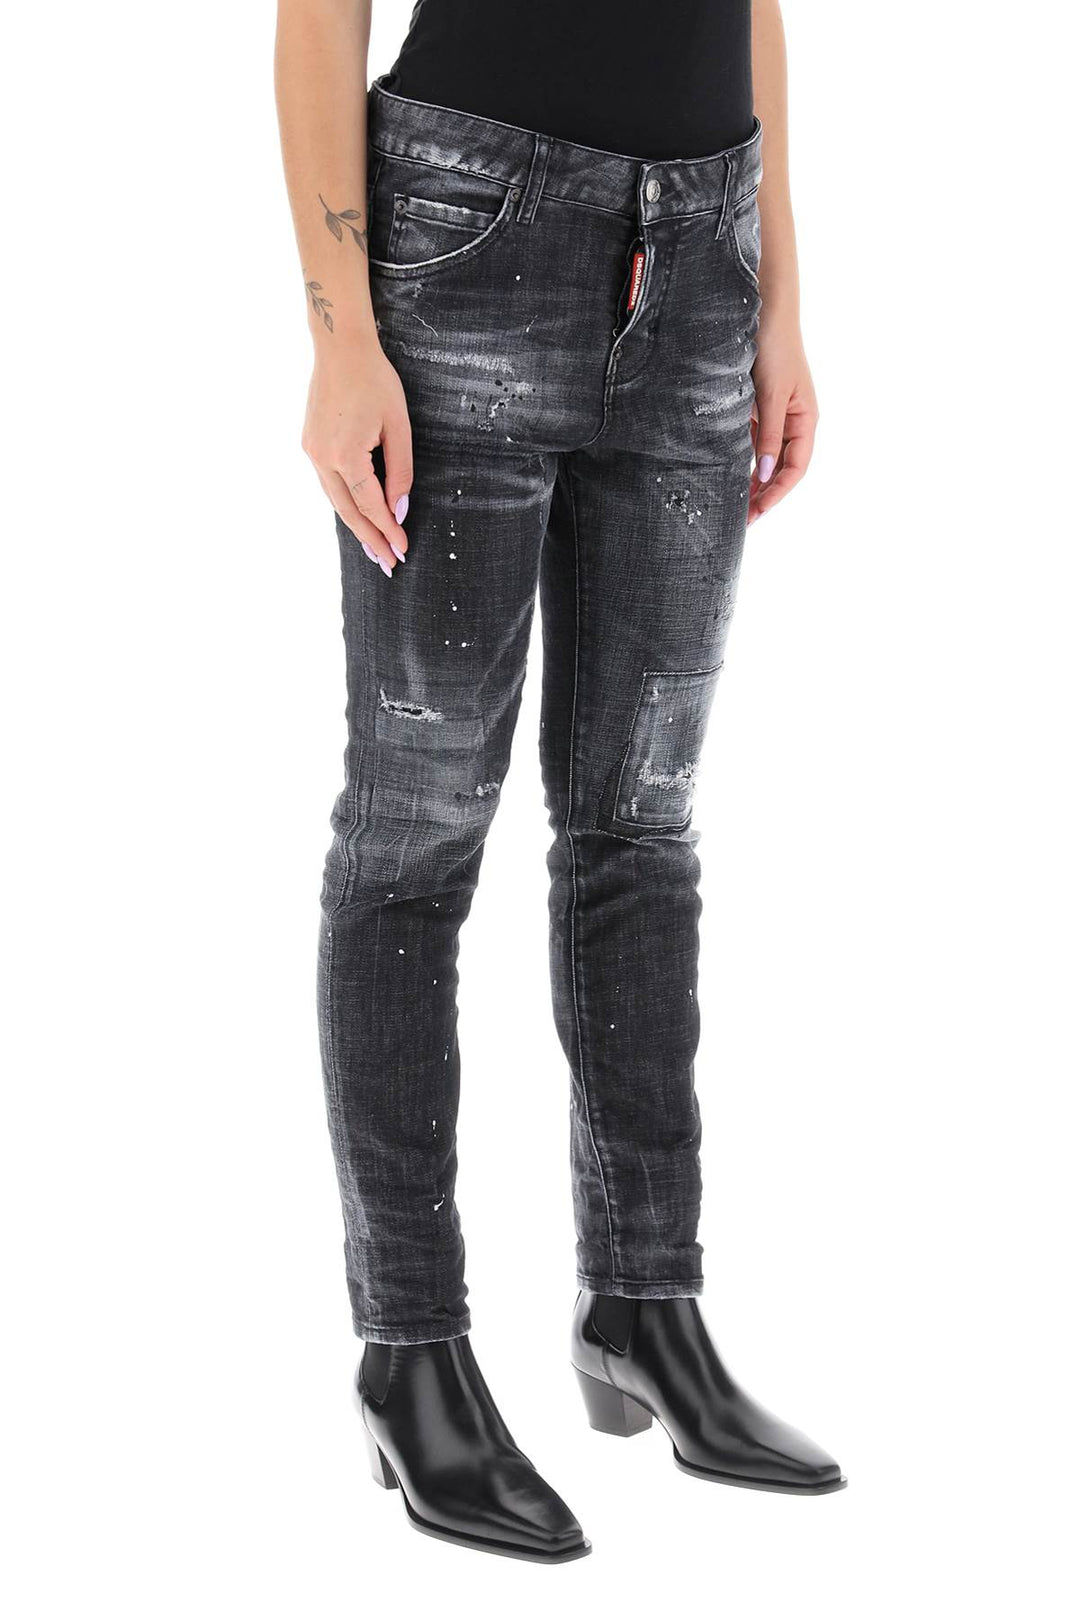 Jeans 'Cool Girl' Distressed - Dsquared2 - Donna